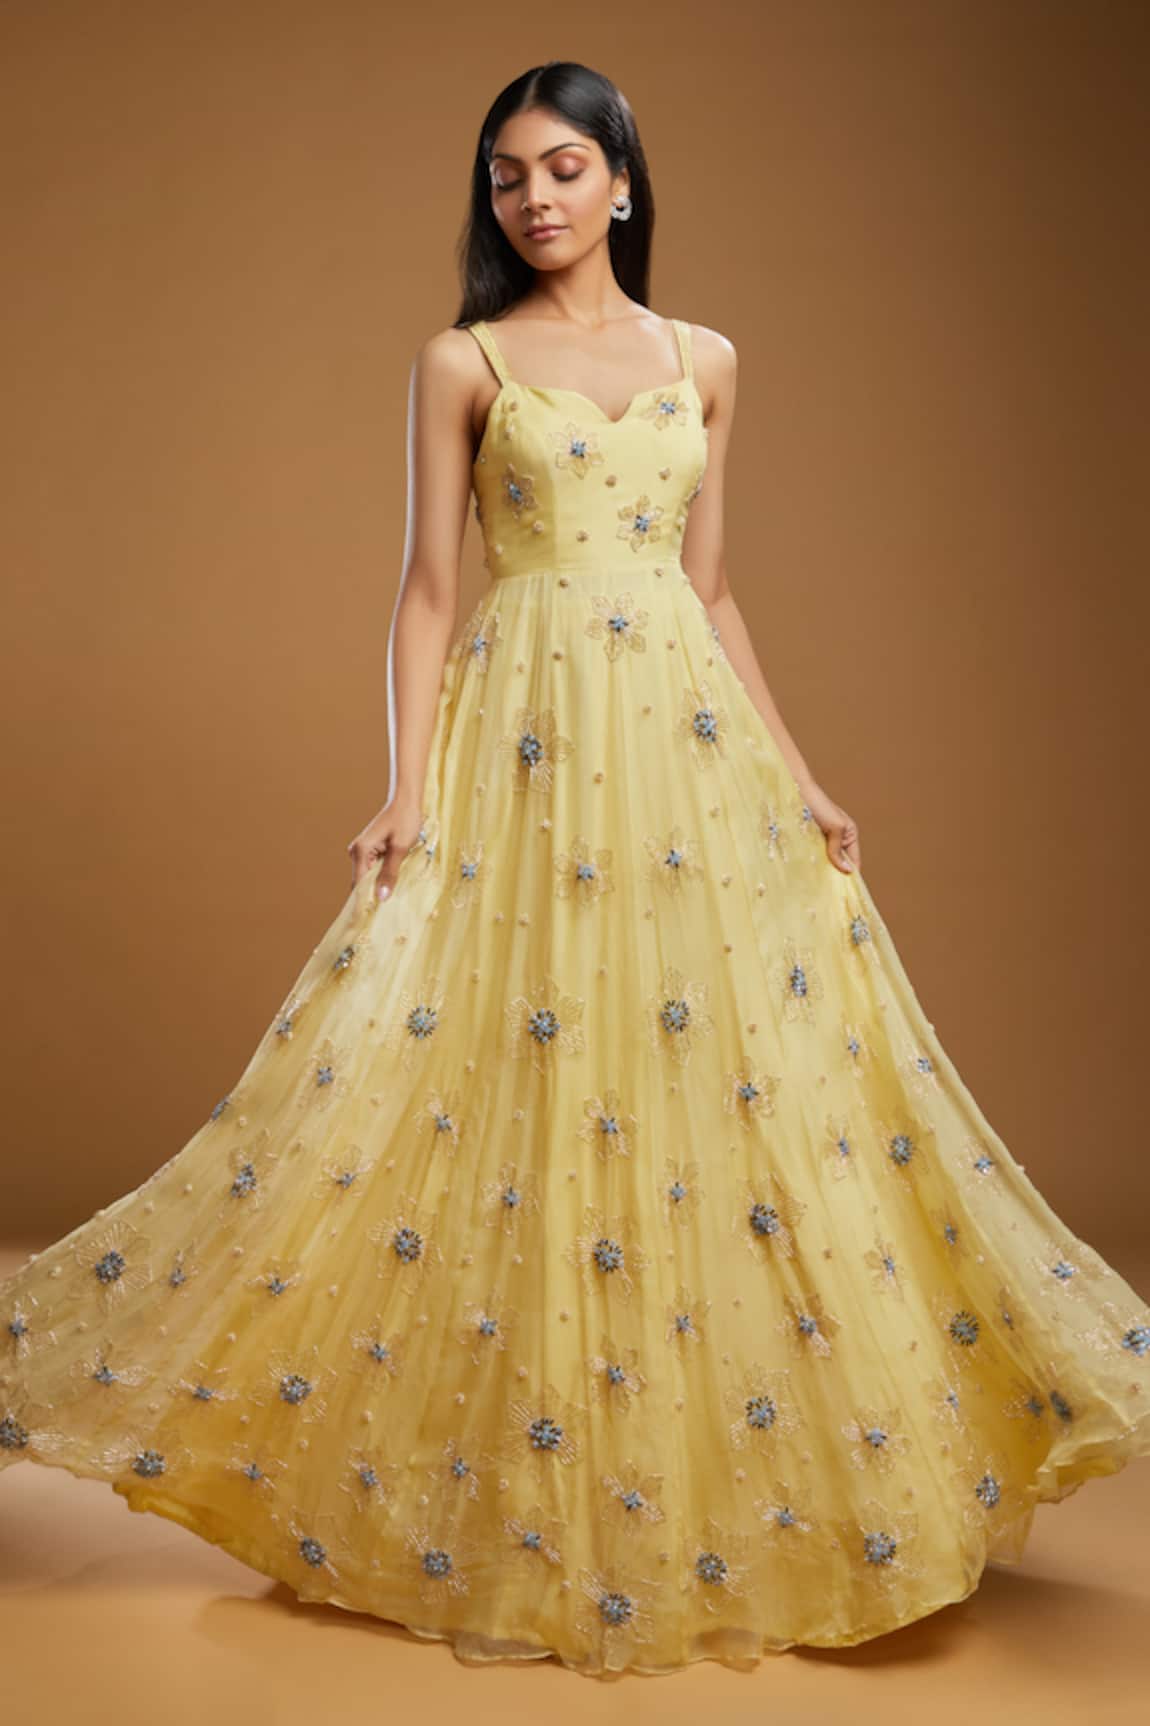 Floral Print Gowns Online Shopping for Women at Low Prices